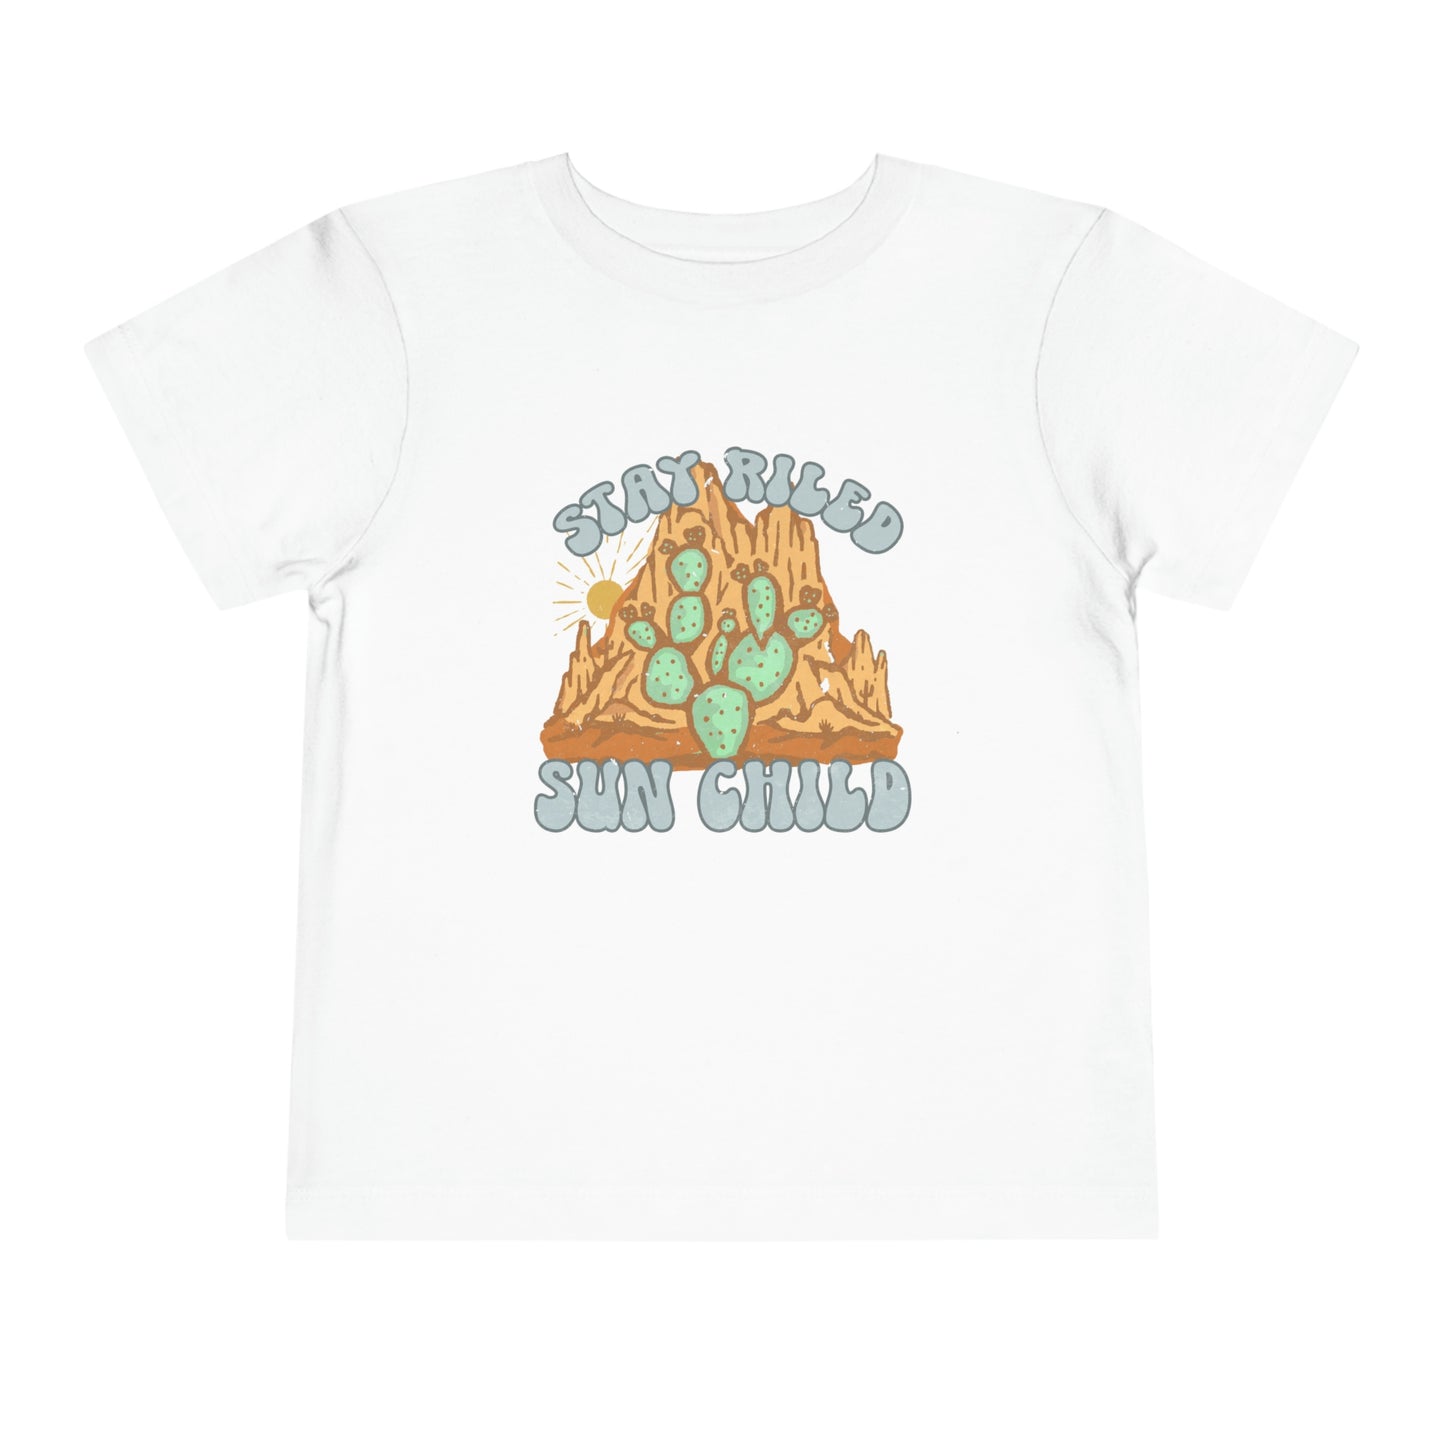 "Stay Riled Wild Child" Toddler Short Sleeve Tee (2T-5T)